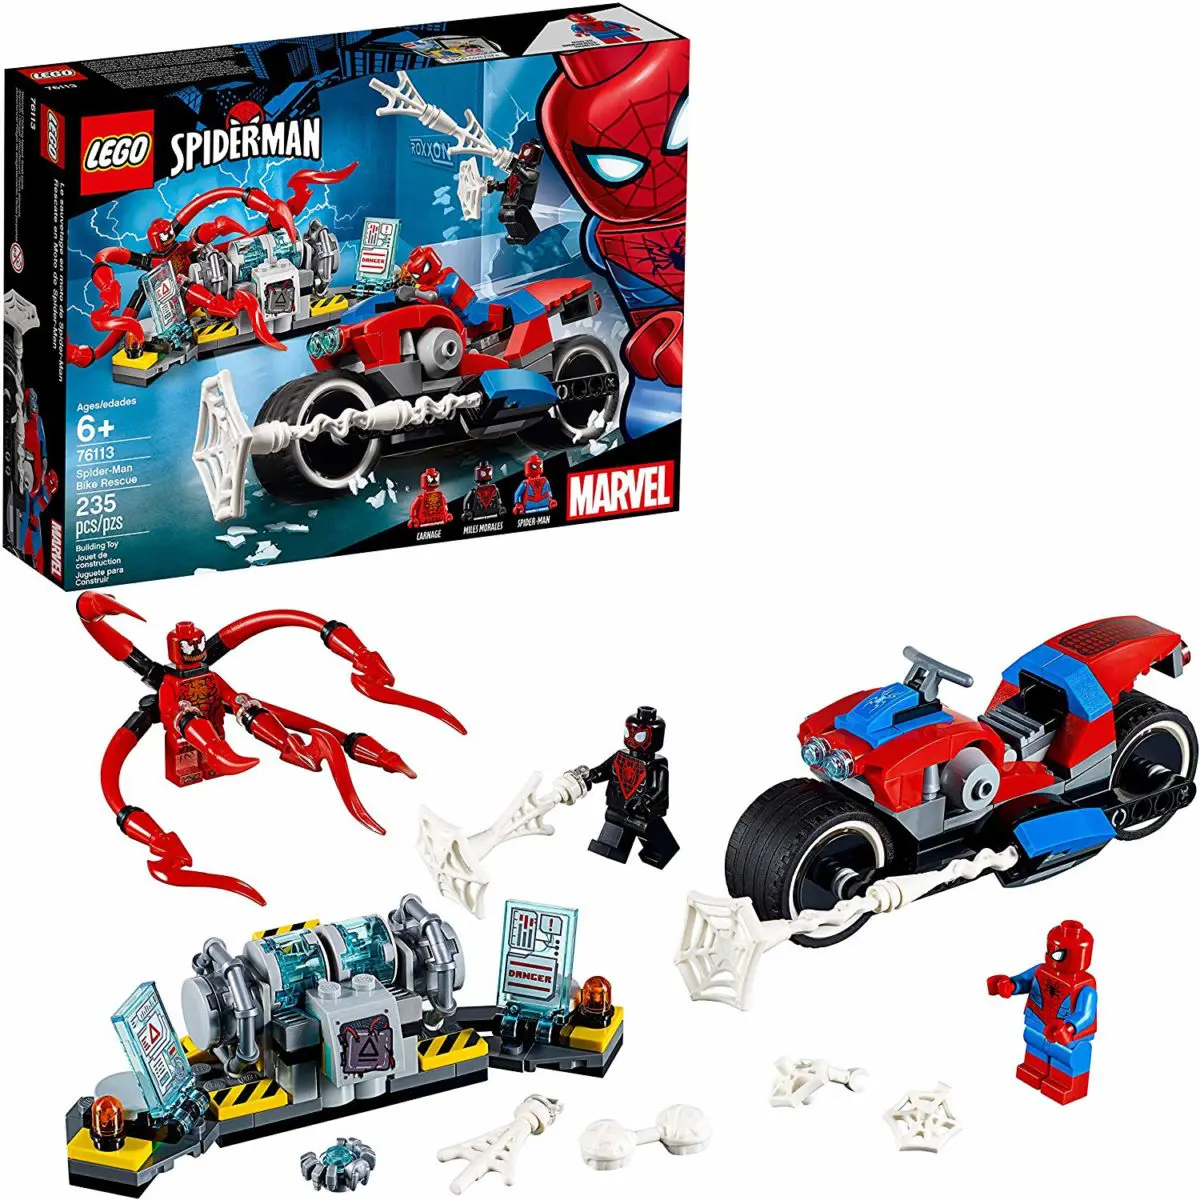 Lego-Marvel Spider-Man Bike Rescue 76113 Building Kit - Top Toys and Gifts for Six Year Old Boys 1